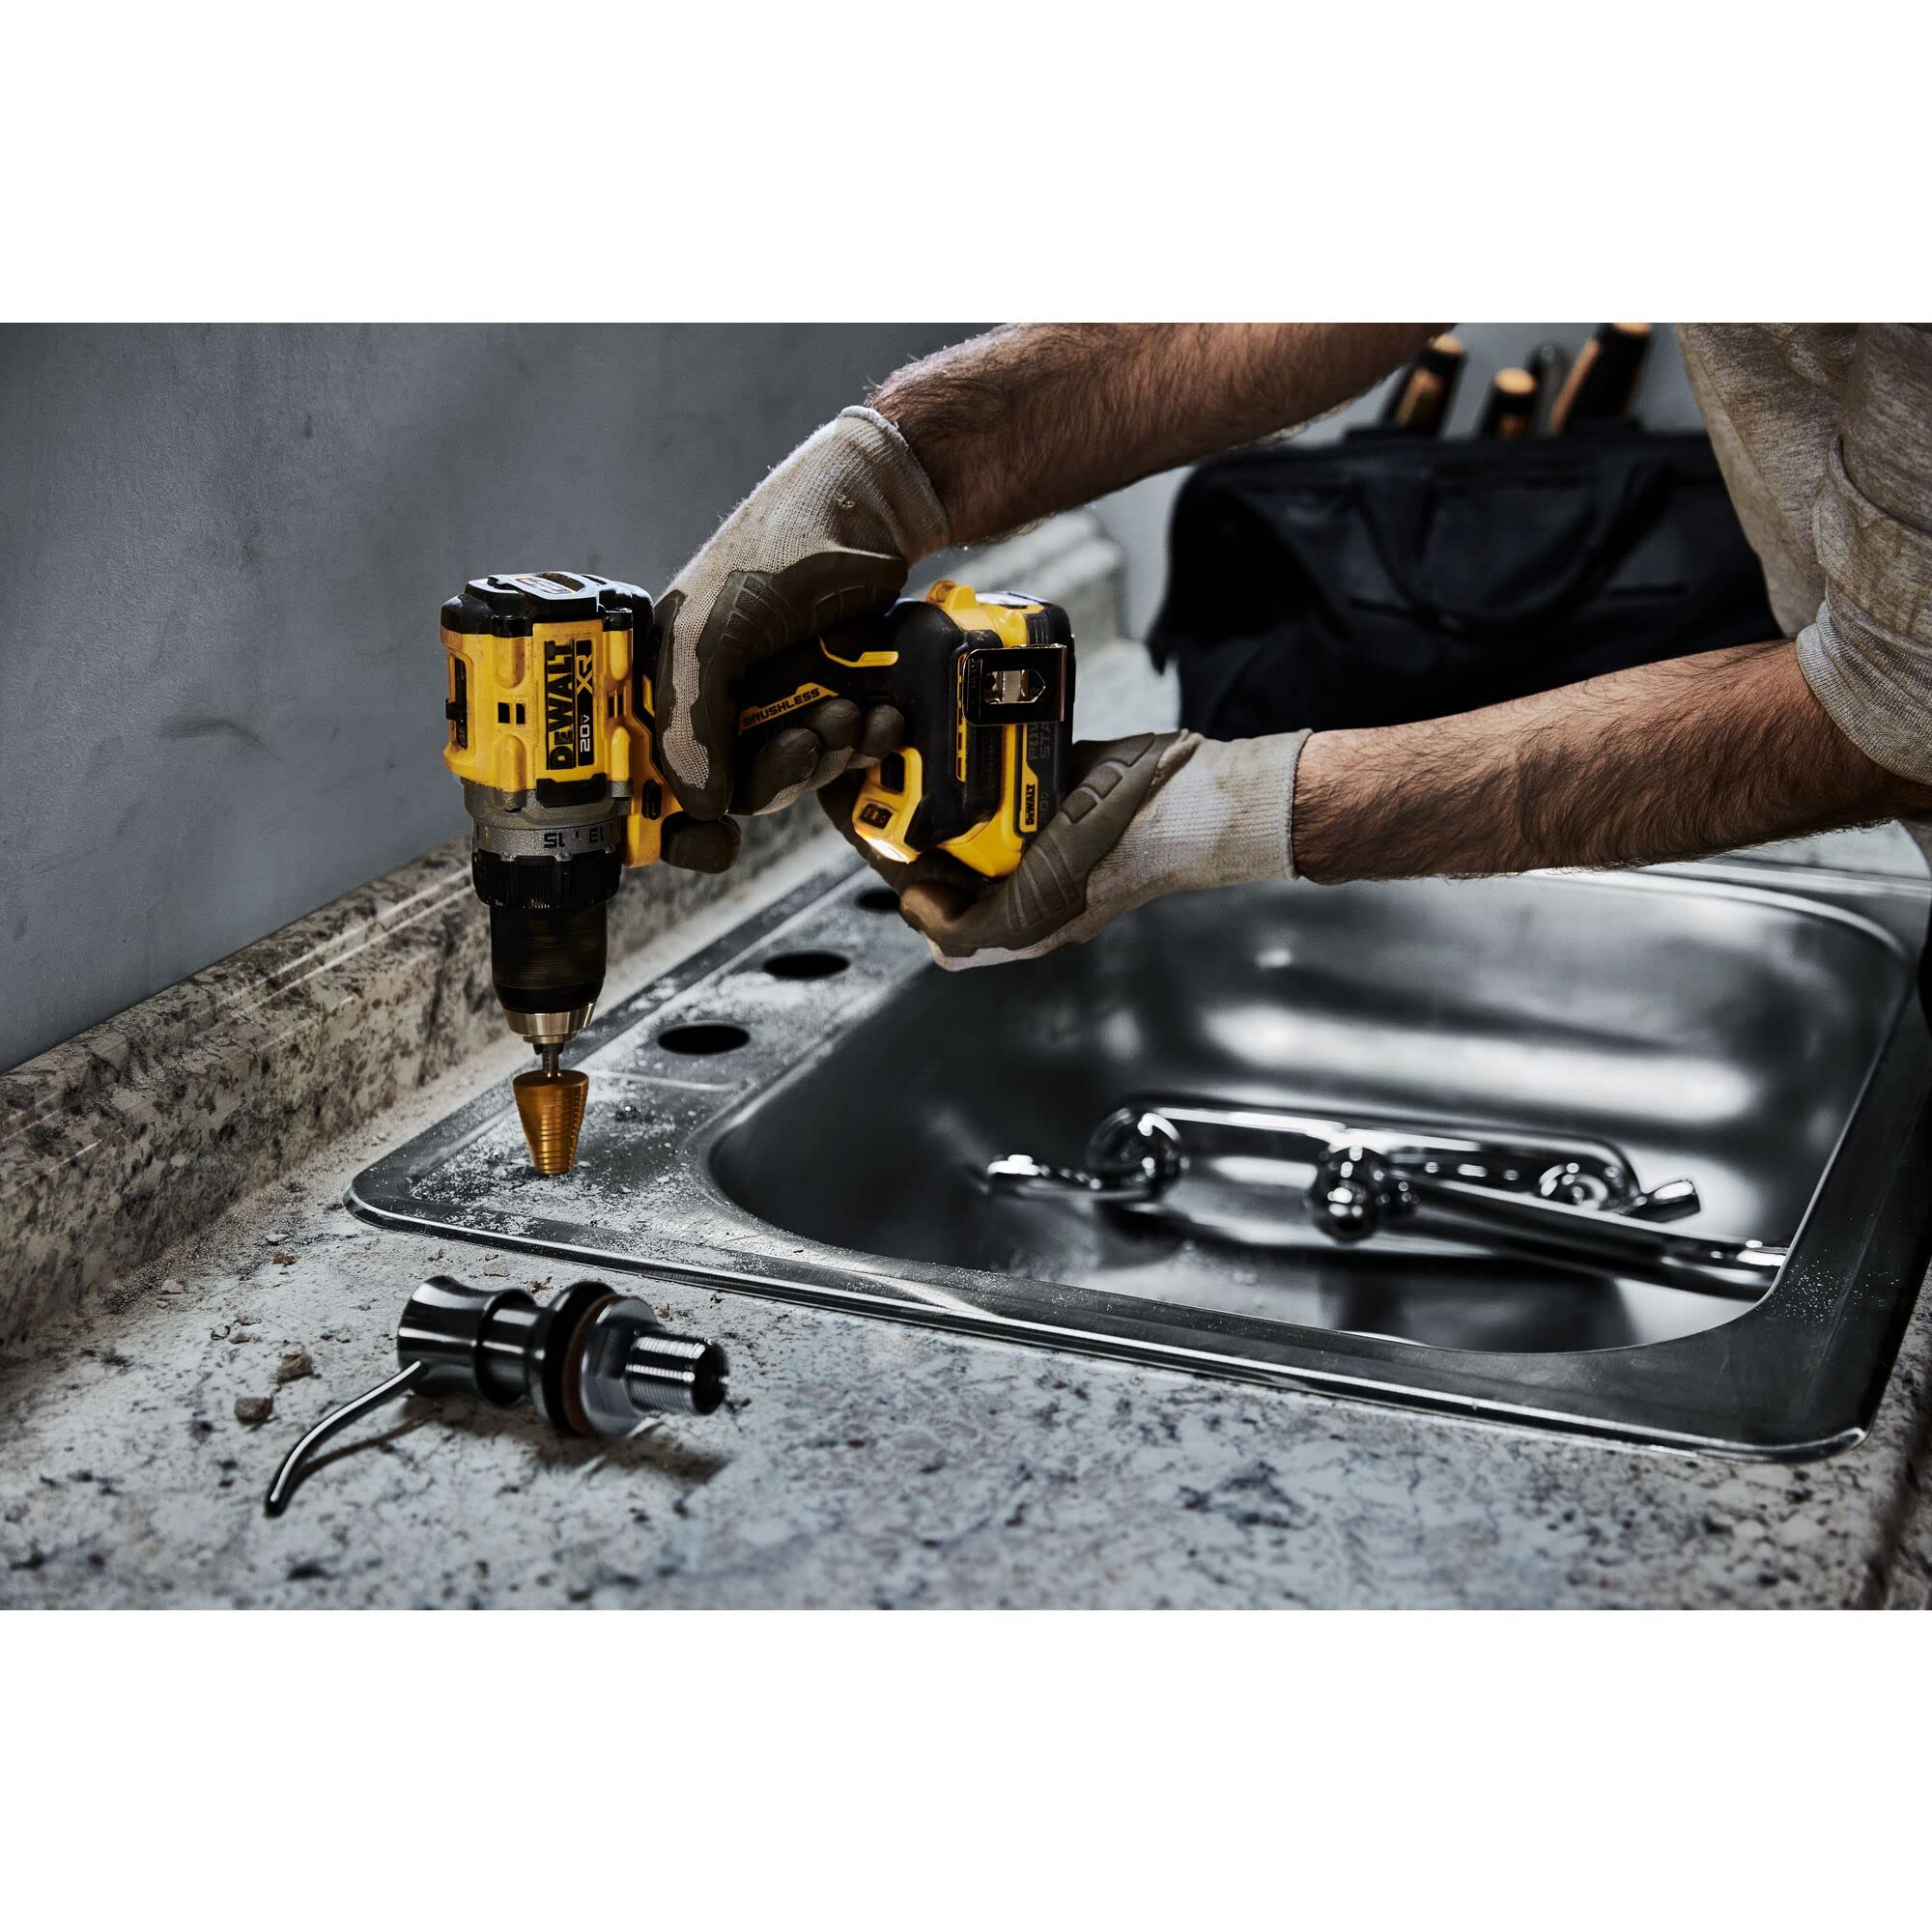 DEWALT 20V MAX XR Brushless Drill/Driver, Compact, Tool Only (DCD791B)